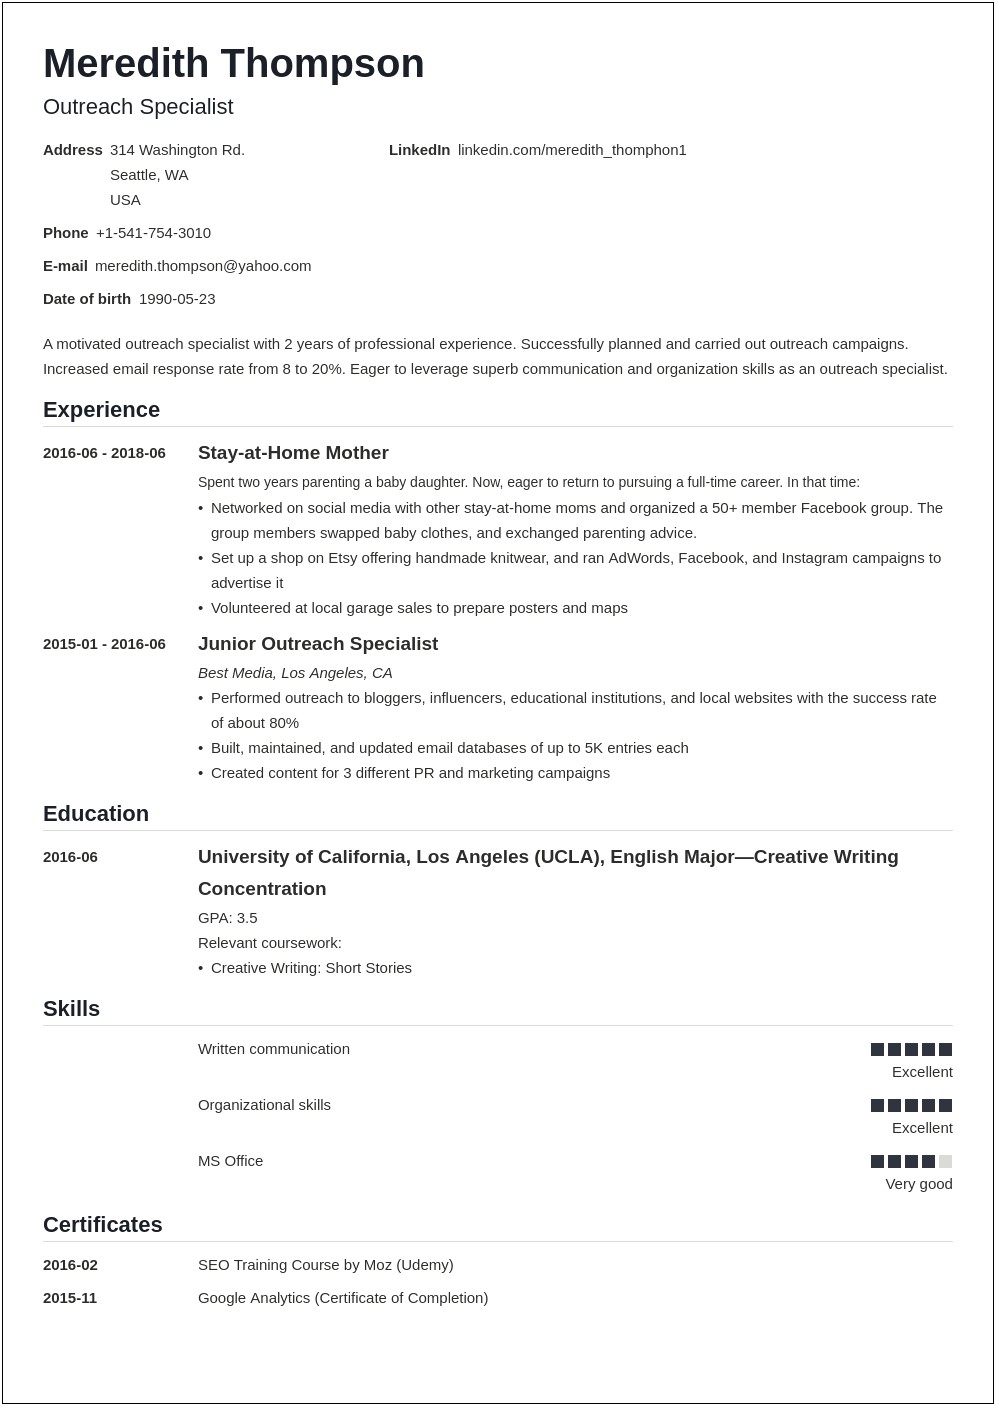 Resume Objective Examples For Re Entering Workforce